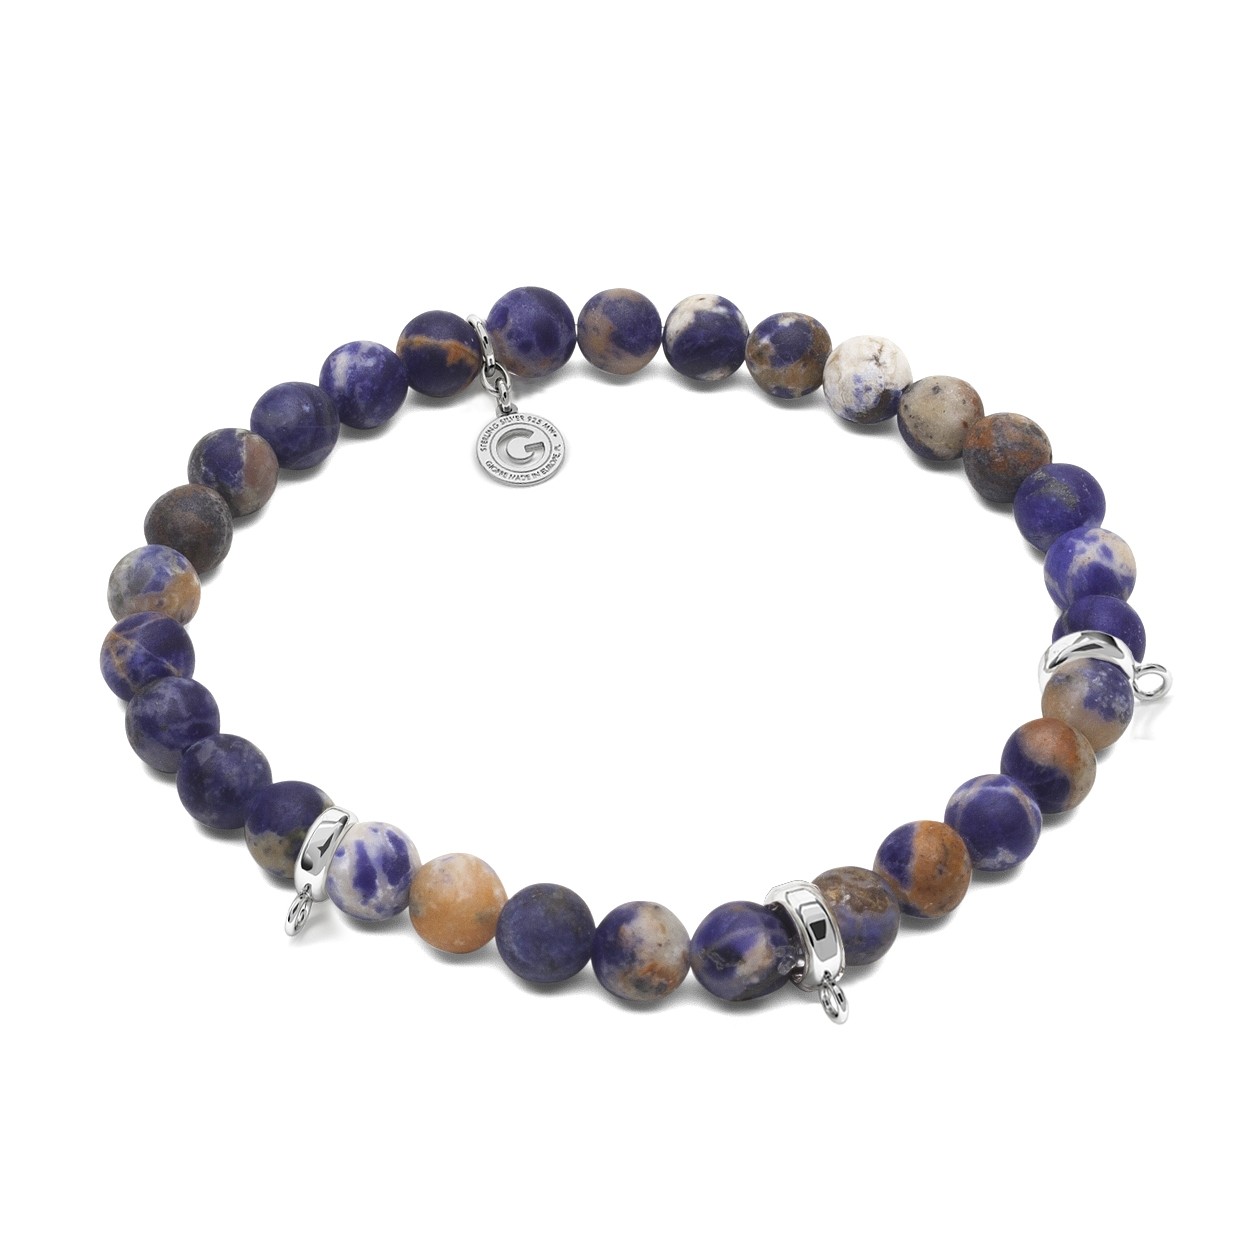 SODALITE, FLEXIBLE BRACELET FOR 3 CHARMS, WITH NATURAL STONES